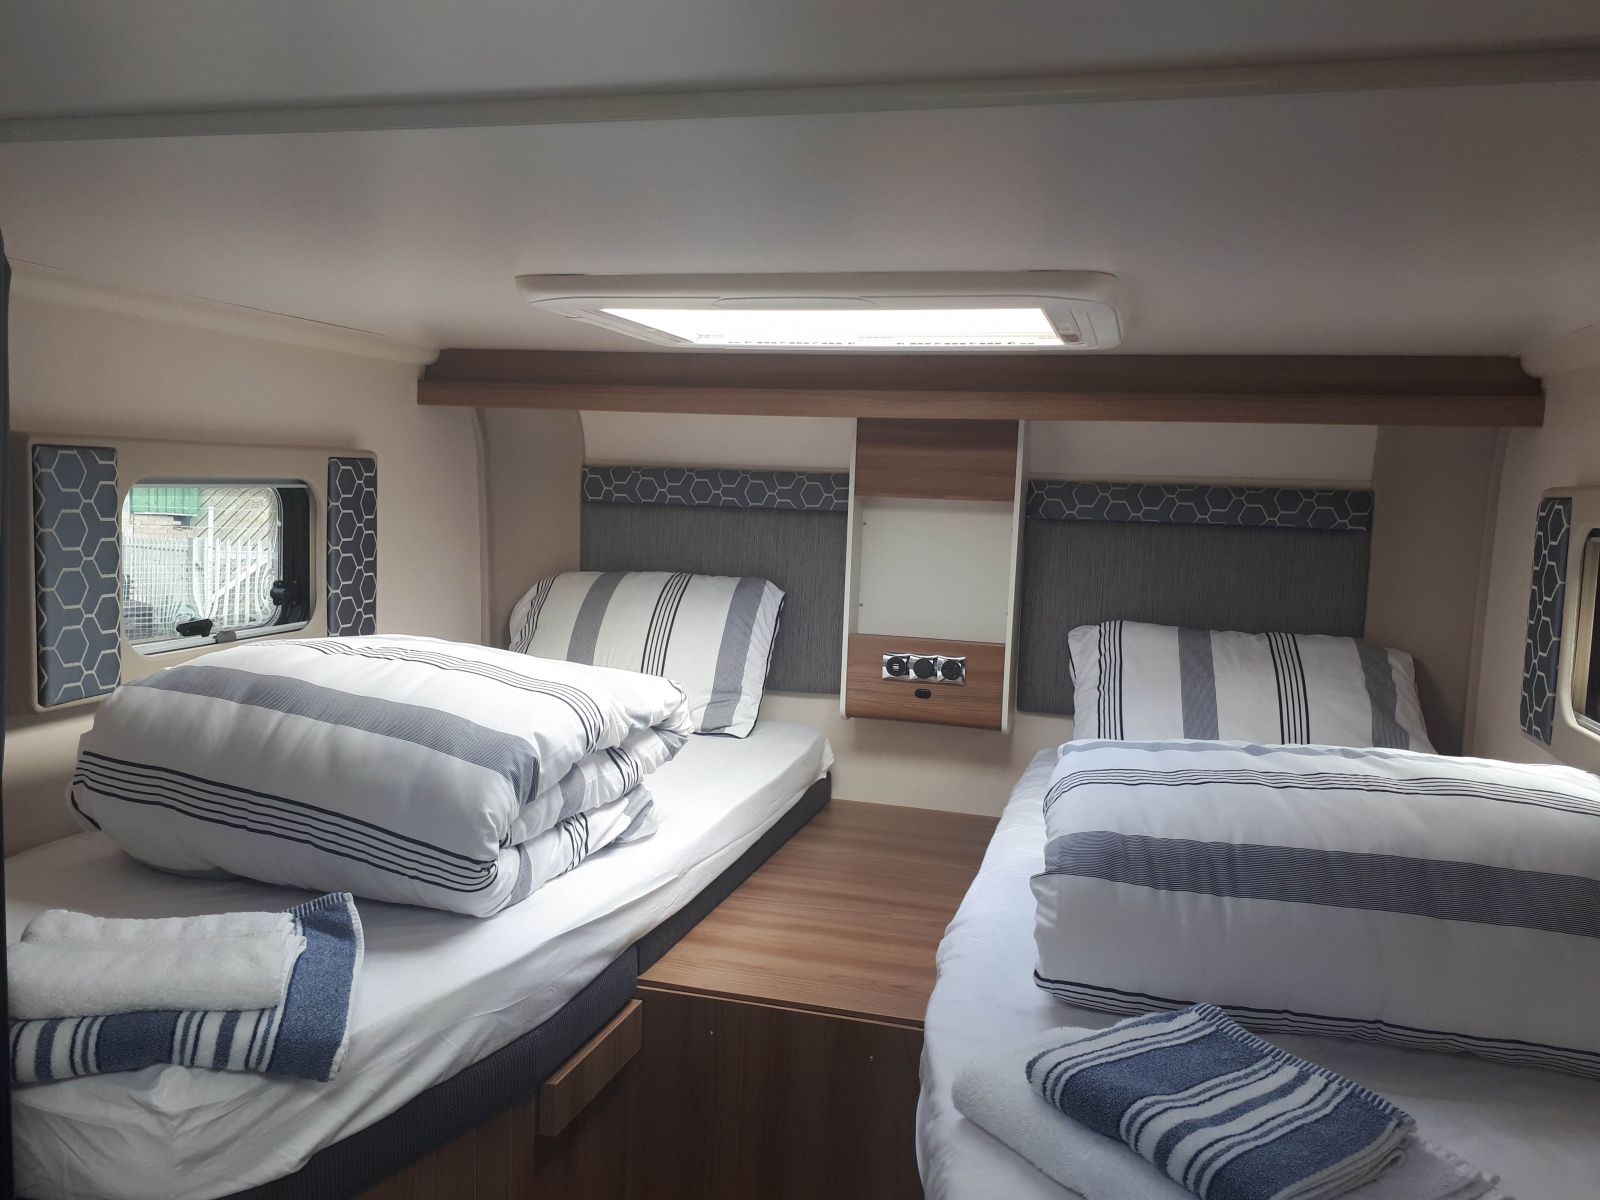 Motorhome with single beds